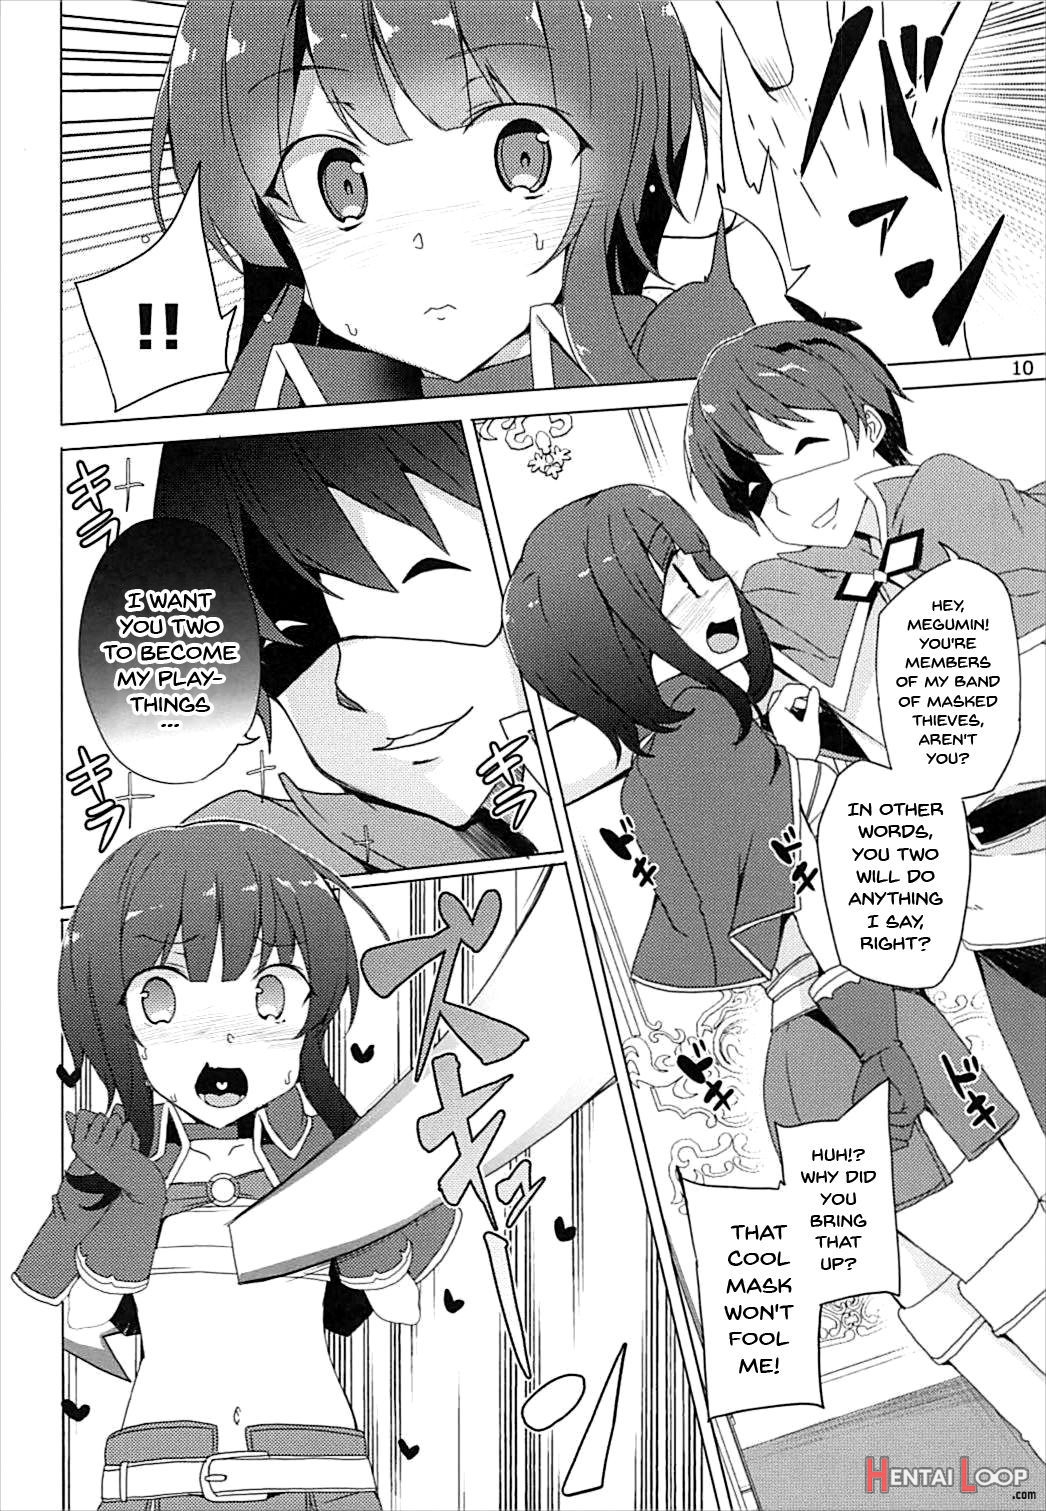 Over There! Megumin's Thief Group page 9